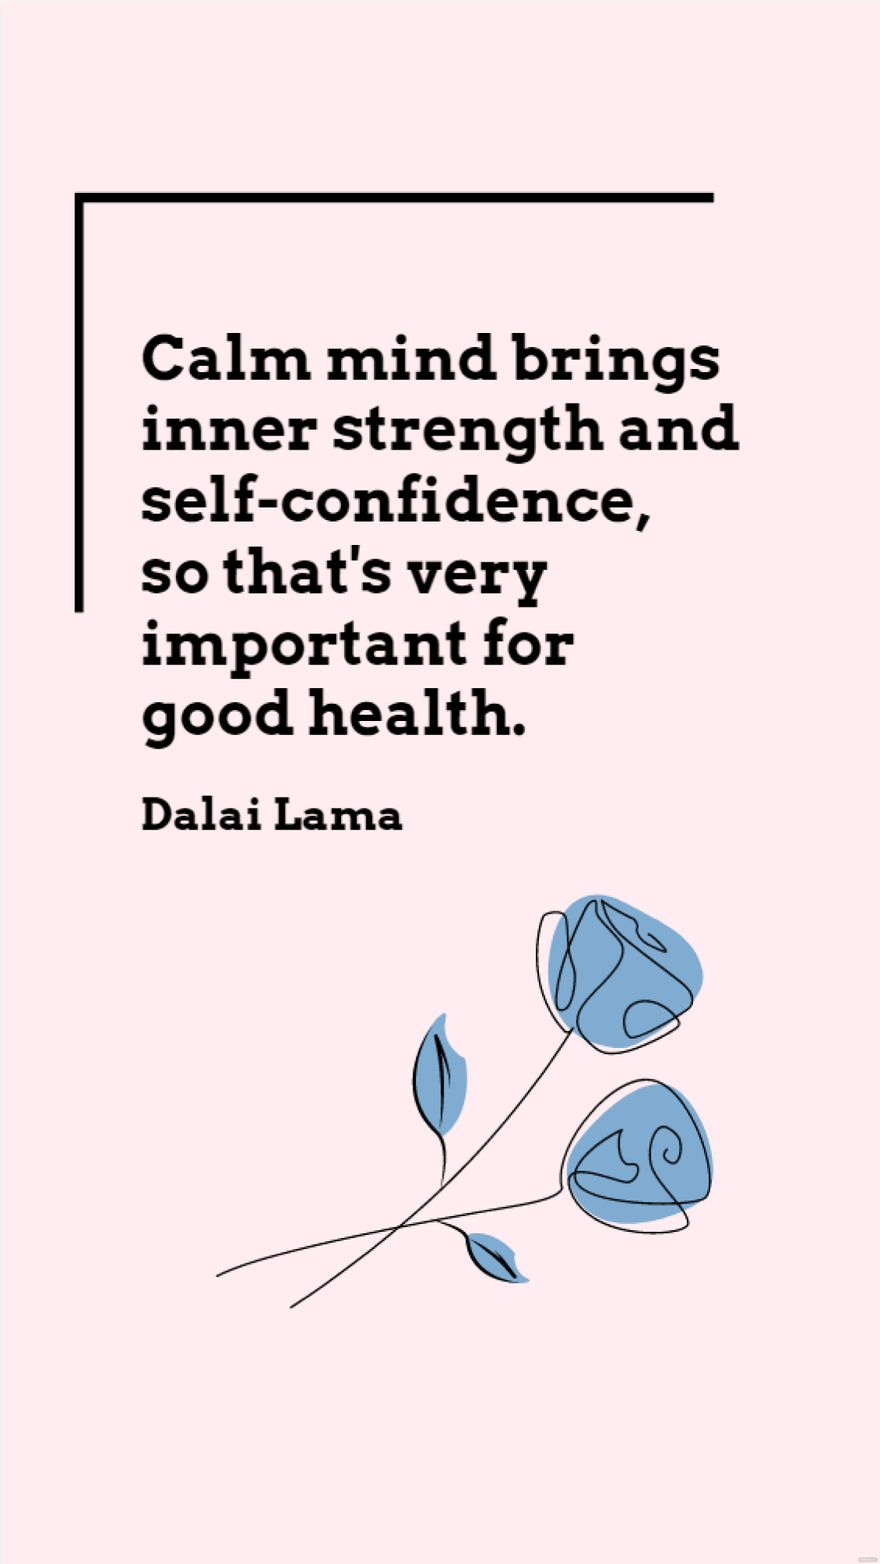 Dalai Lama - Calm mind brings inner strength and self-confidence, so that's very important for good health.